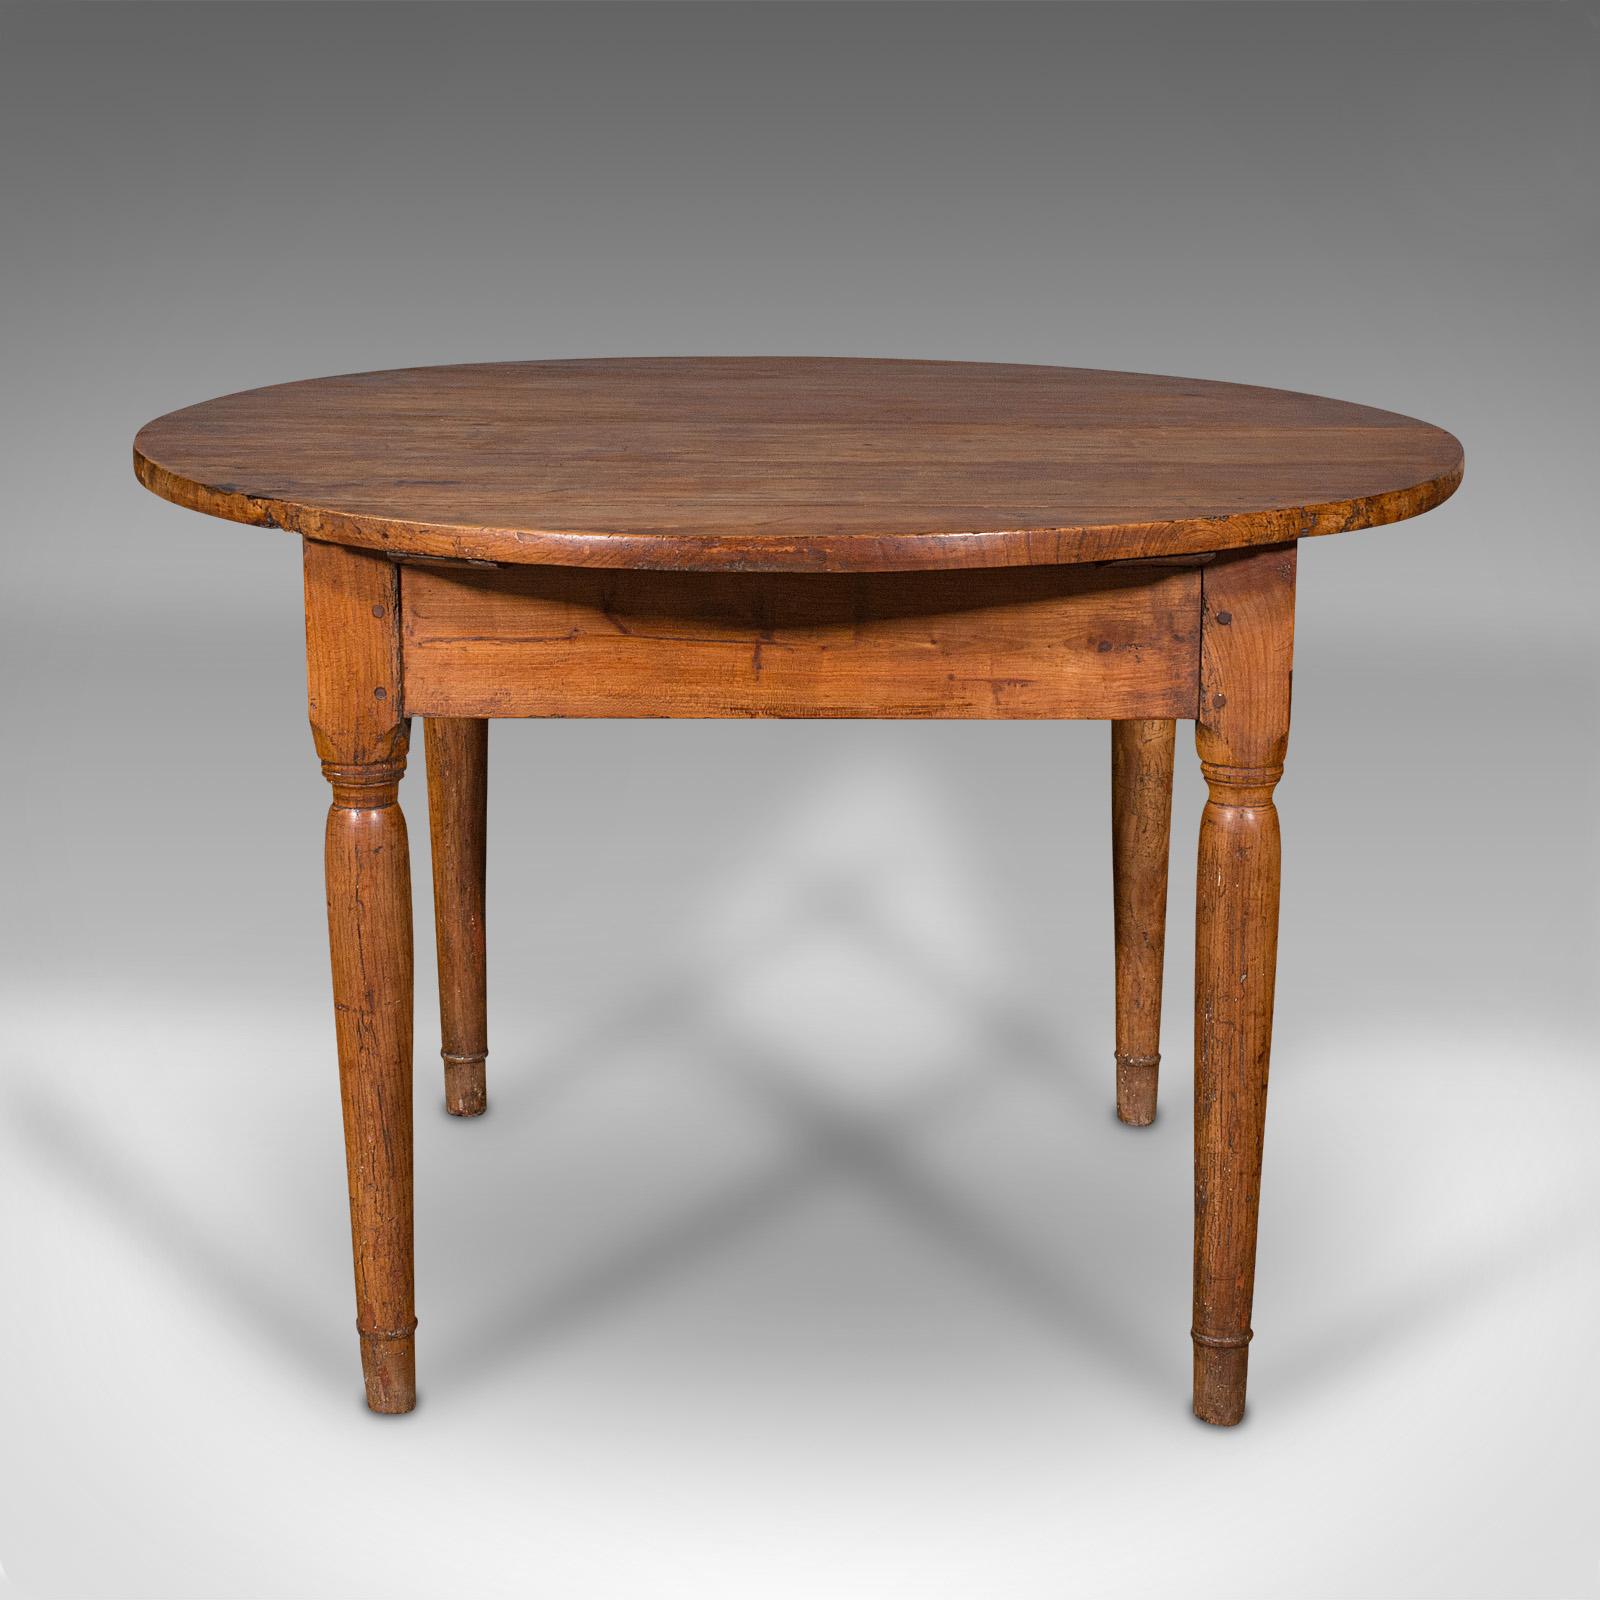 Fruitwood Antique Provencal Baker's Table, French, 4 Seat, Kitchen, Boulangerie, Victorian